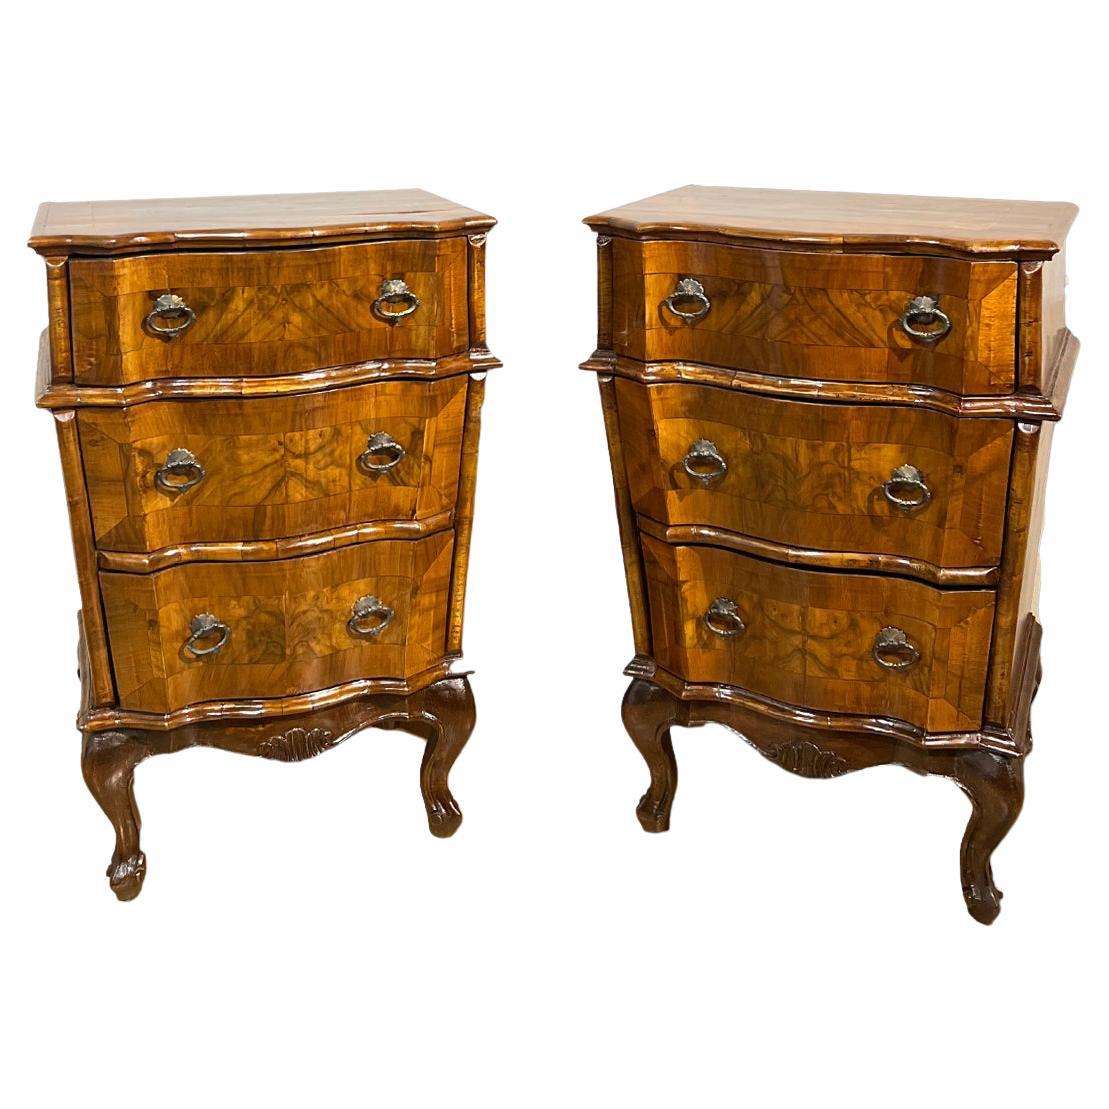 Mid-18th Century Couple of Walnut Bedside Tables